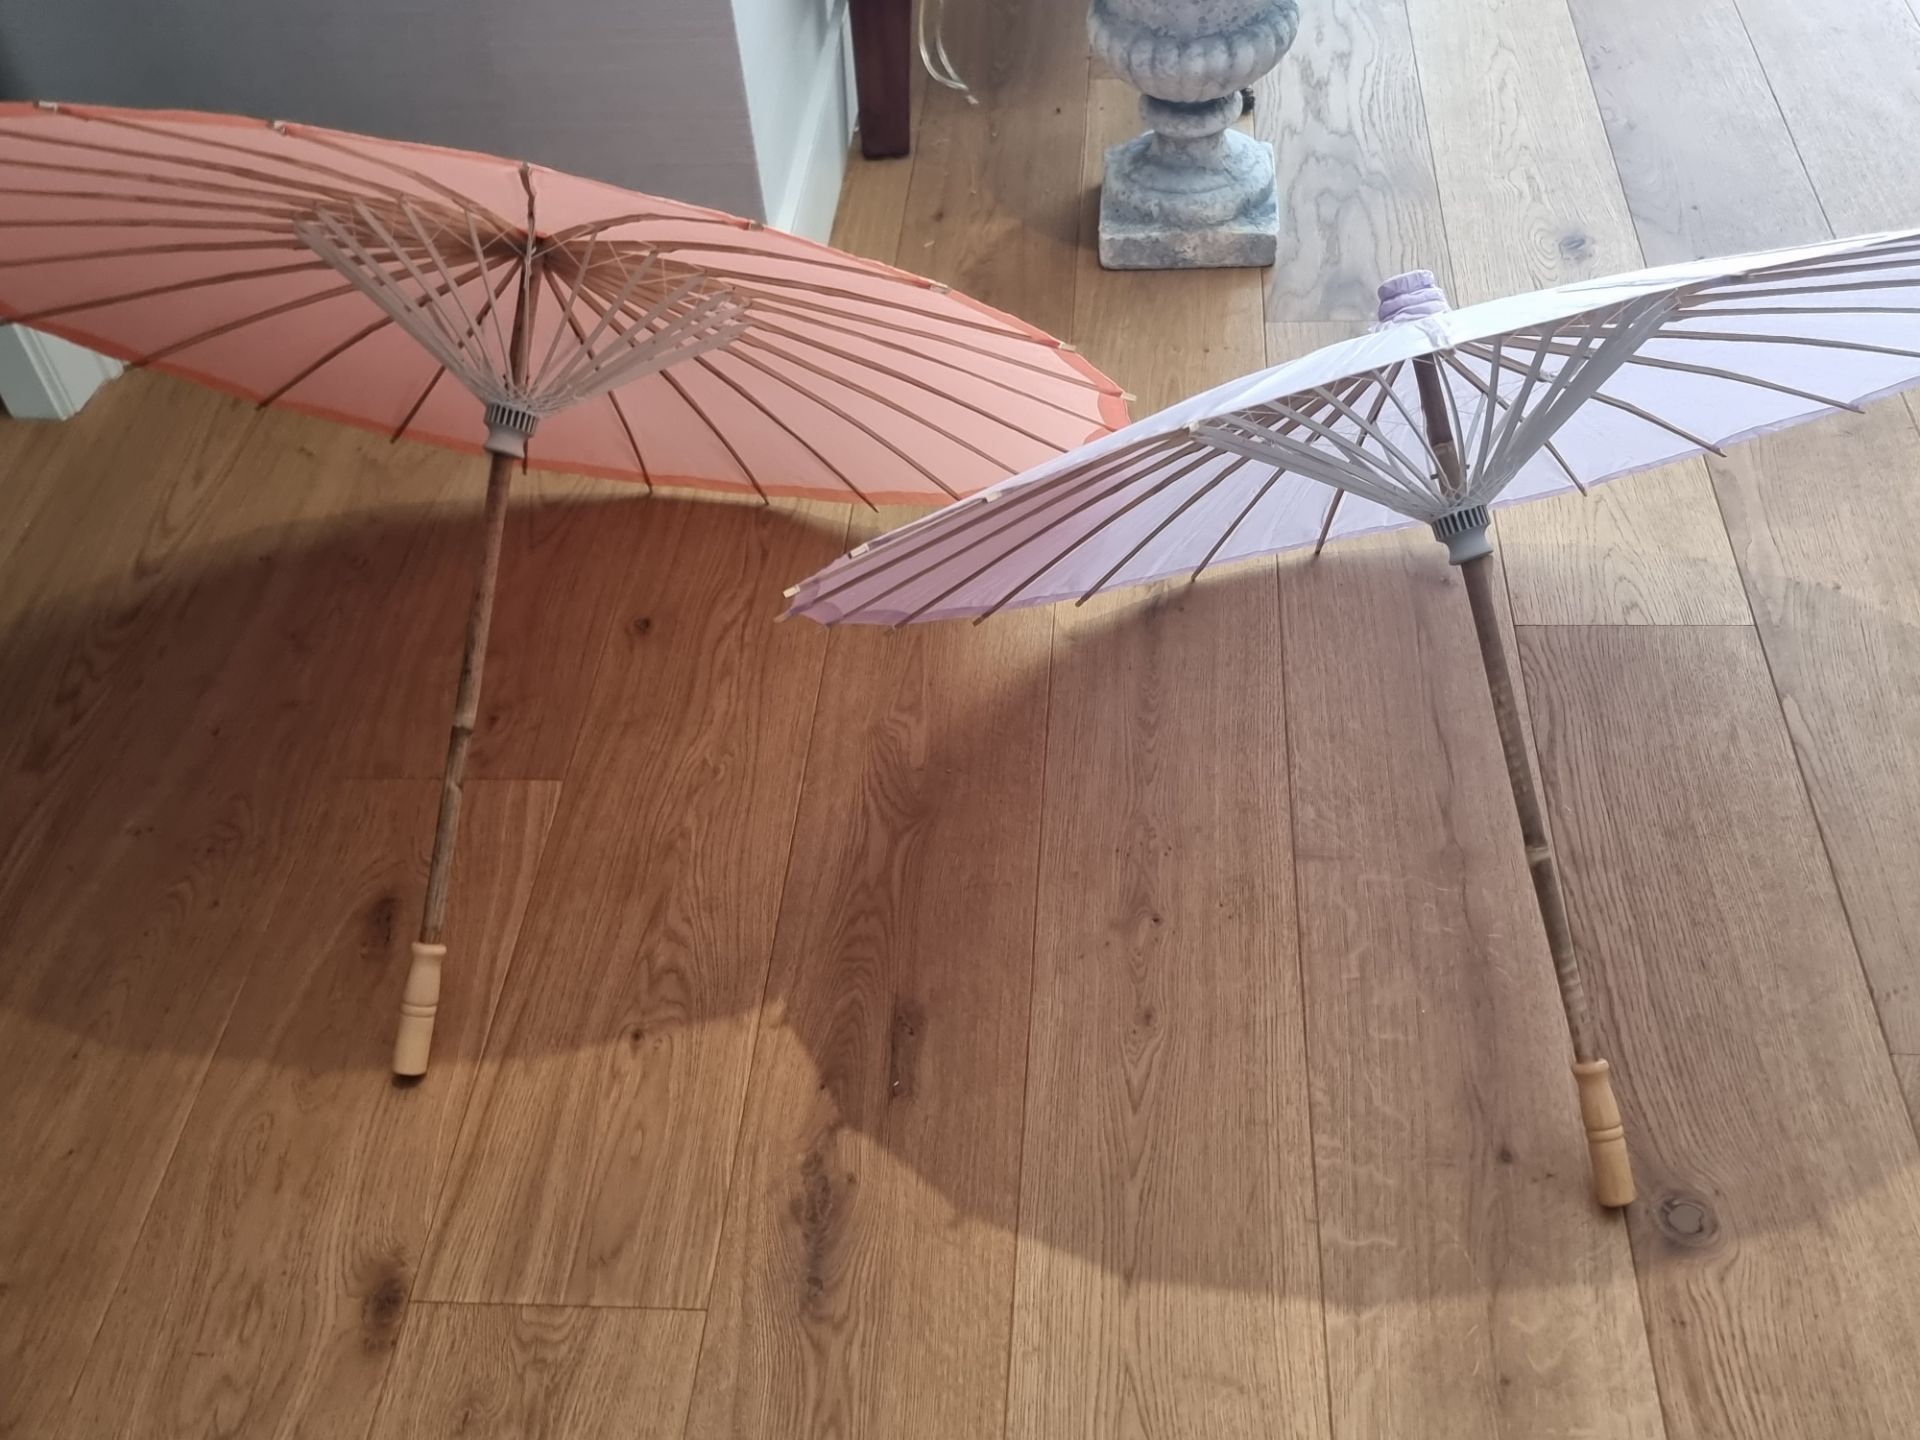 2 x Chinese Paper And Bamboo Parasols With Elegant Handle Painted Rice Paper Parasols Manual - Image 5 of 5